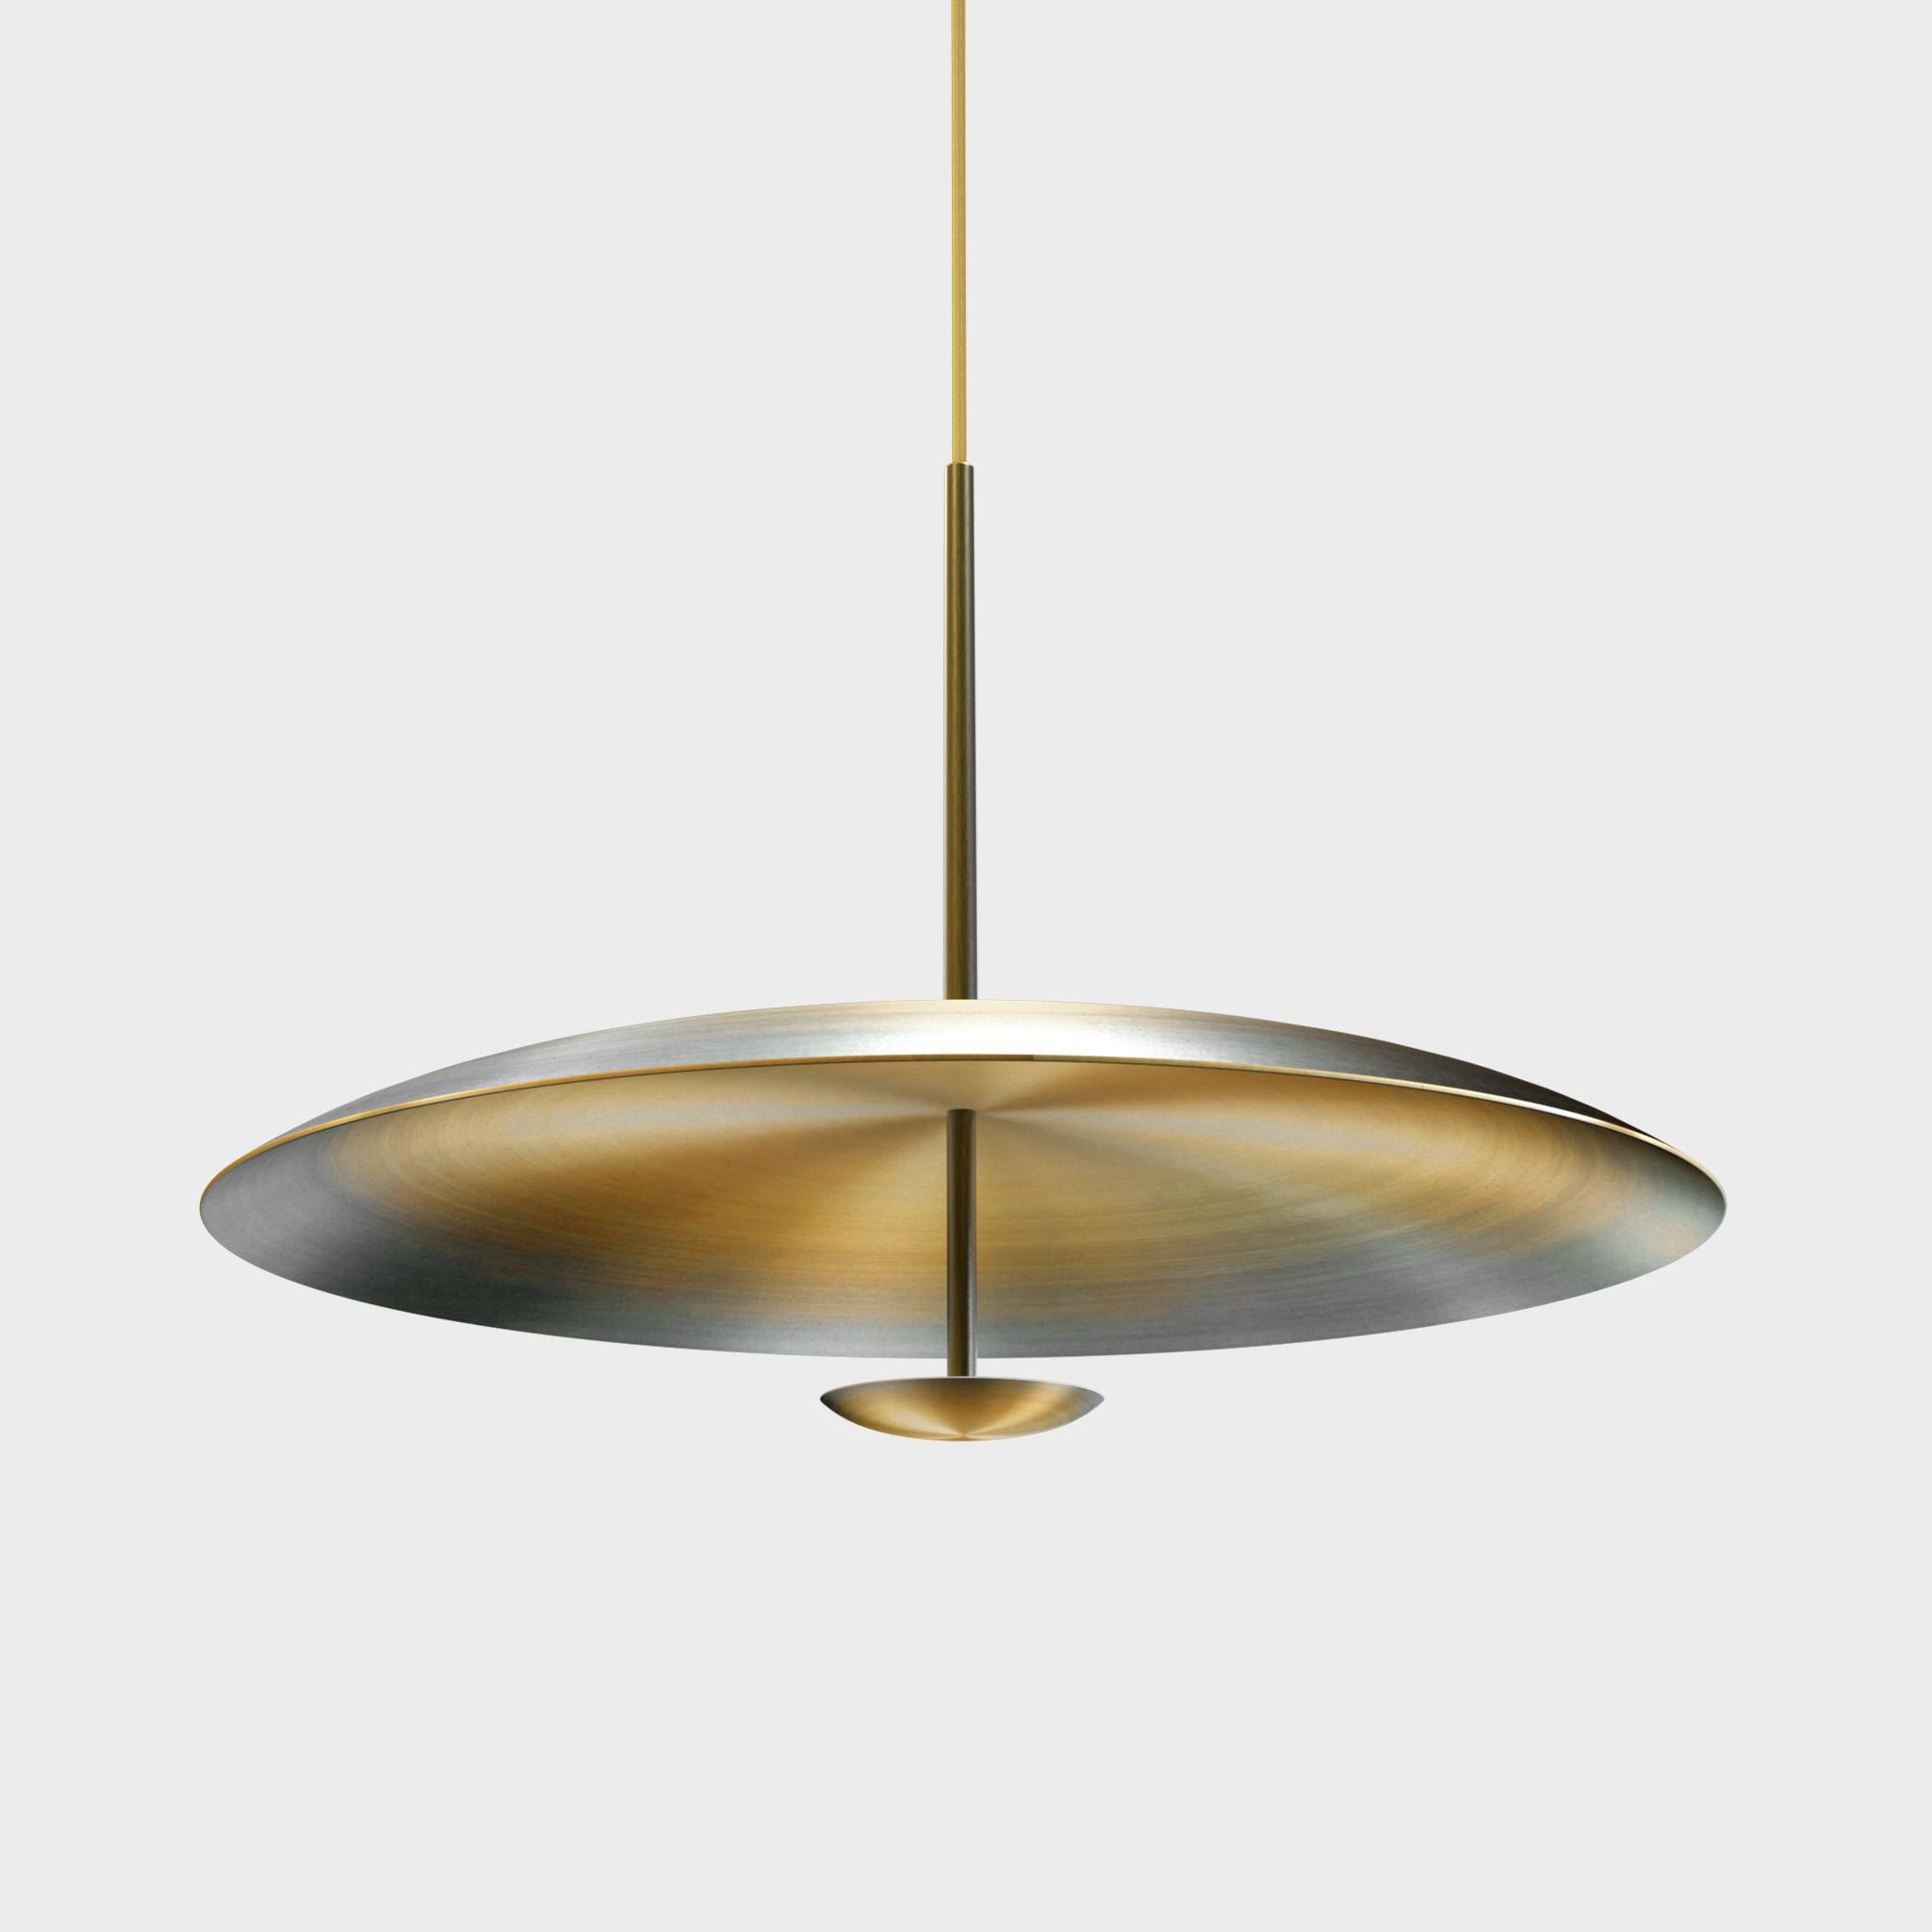 Unique opportunity to procure a gorgeous pendant light designed by international illumination artist Eva Menz. Two finely hand-spun brass plates make up this pendant light, a bronze to brass gradient accentuates the shape. The light is projected